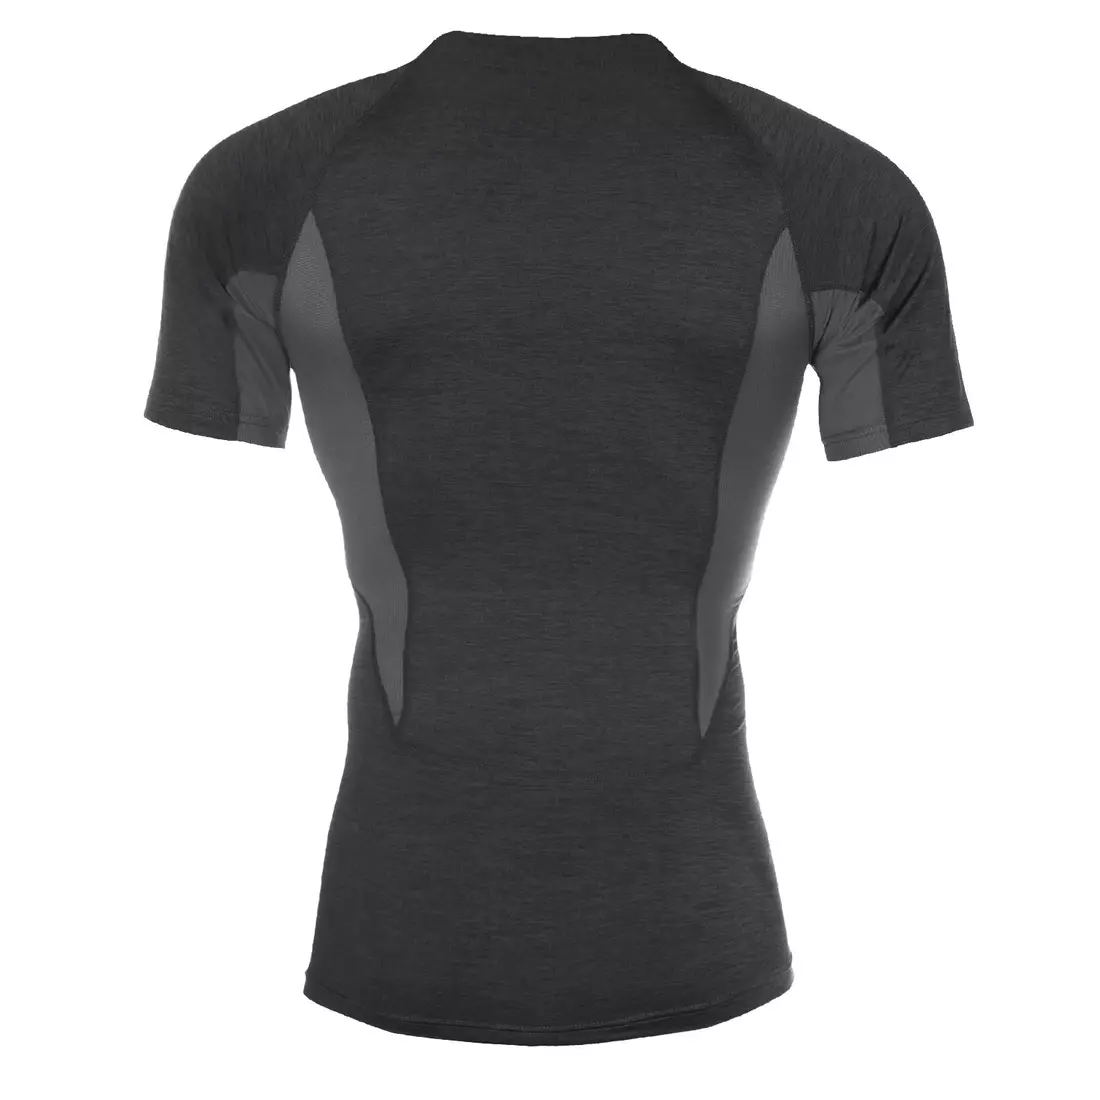 FORCE SUMMER thermoactive shirt, grey